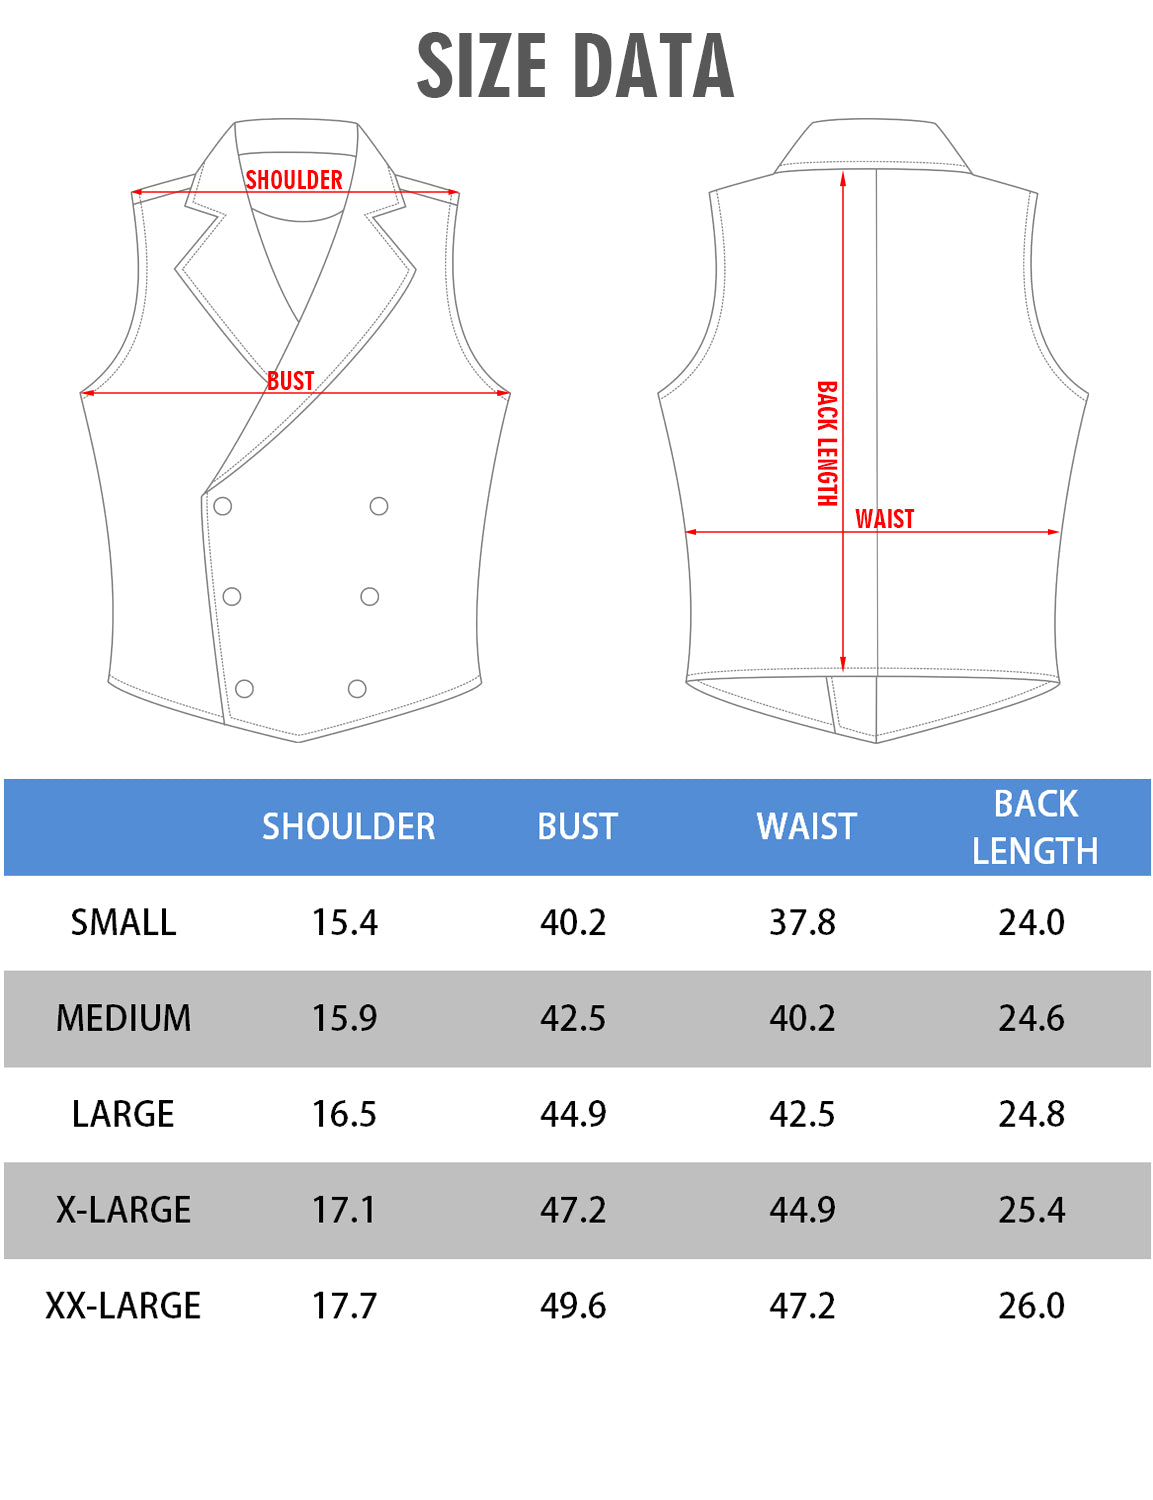 VATPAVE Mens Victorian Double Breasted Vest Gothic Steampunk Waistcoat